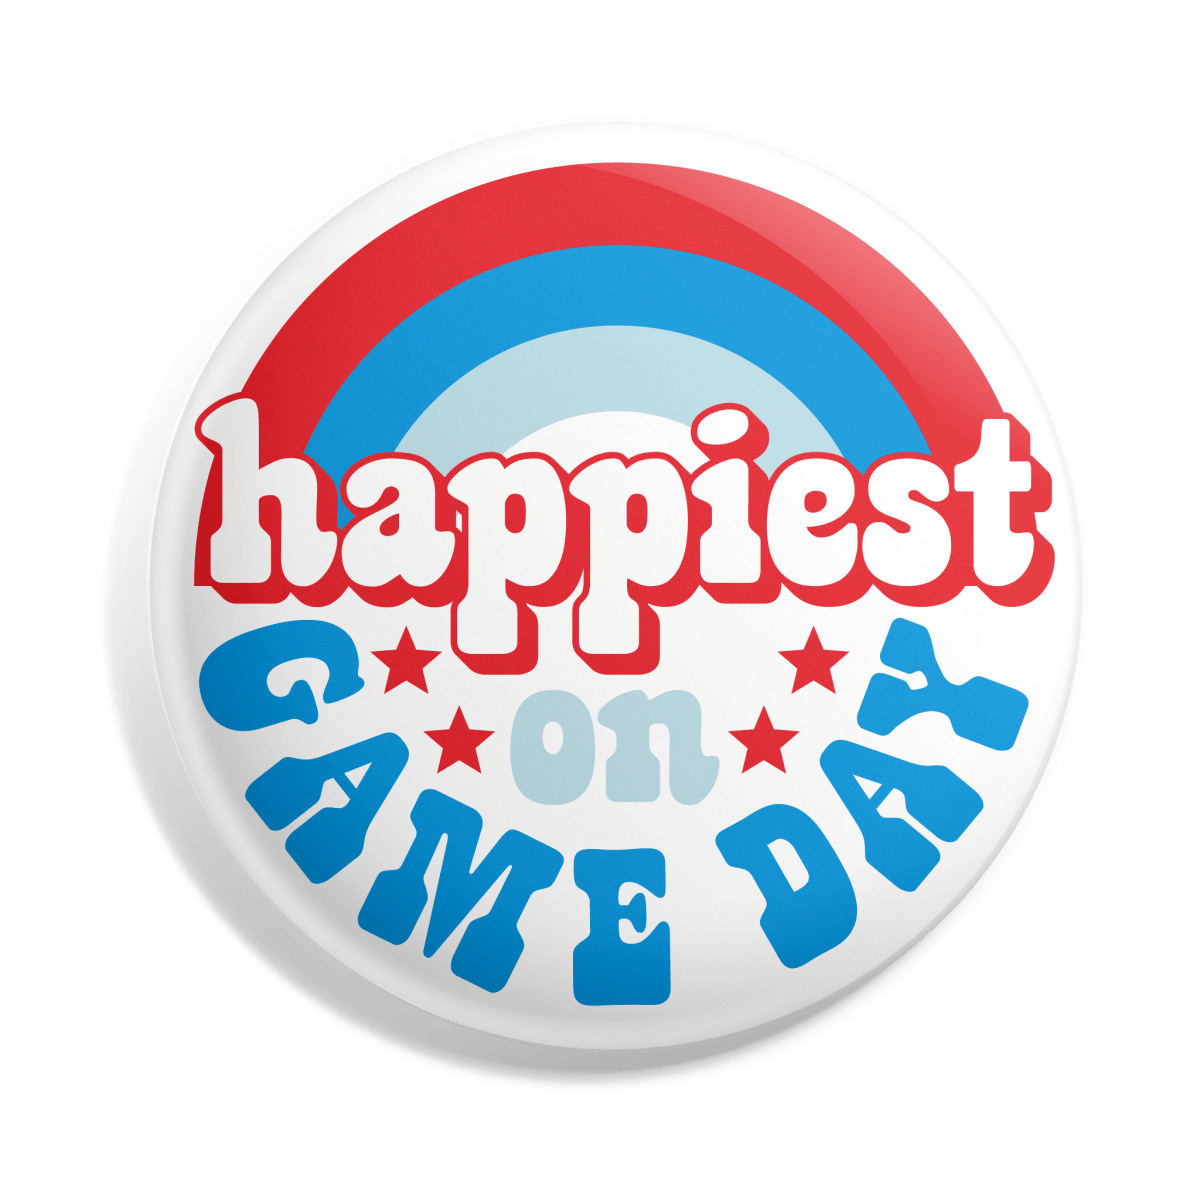 Ole Miss Happiest Gameday Button - Shop B-Unlimited